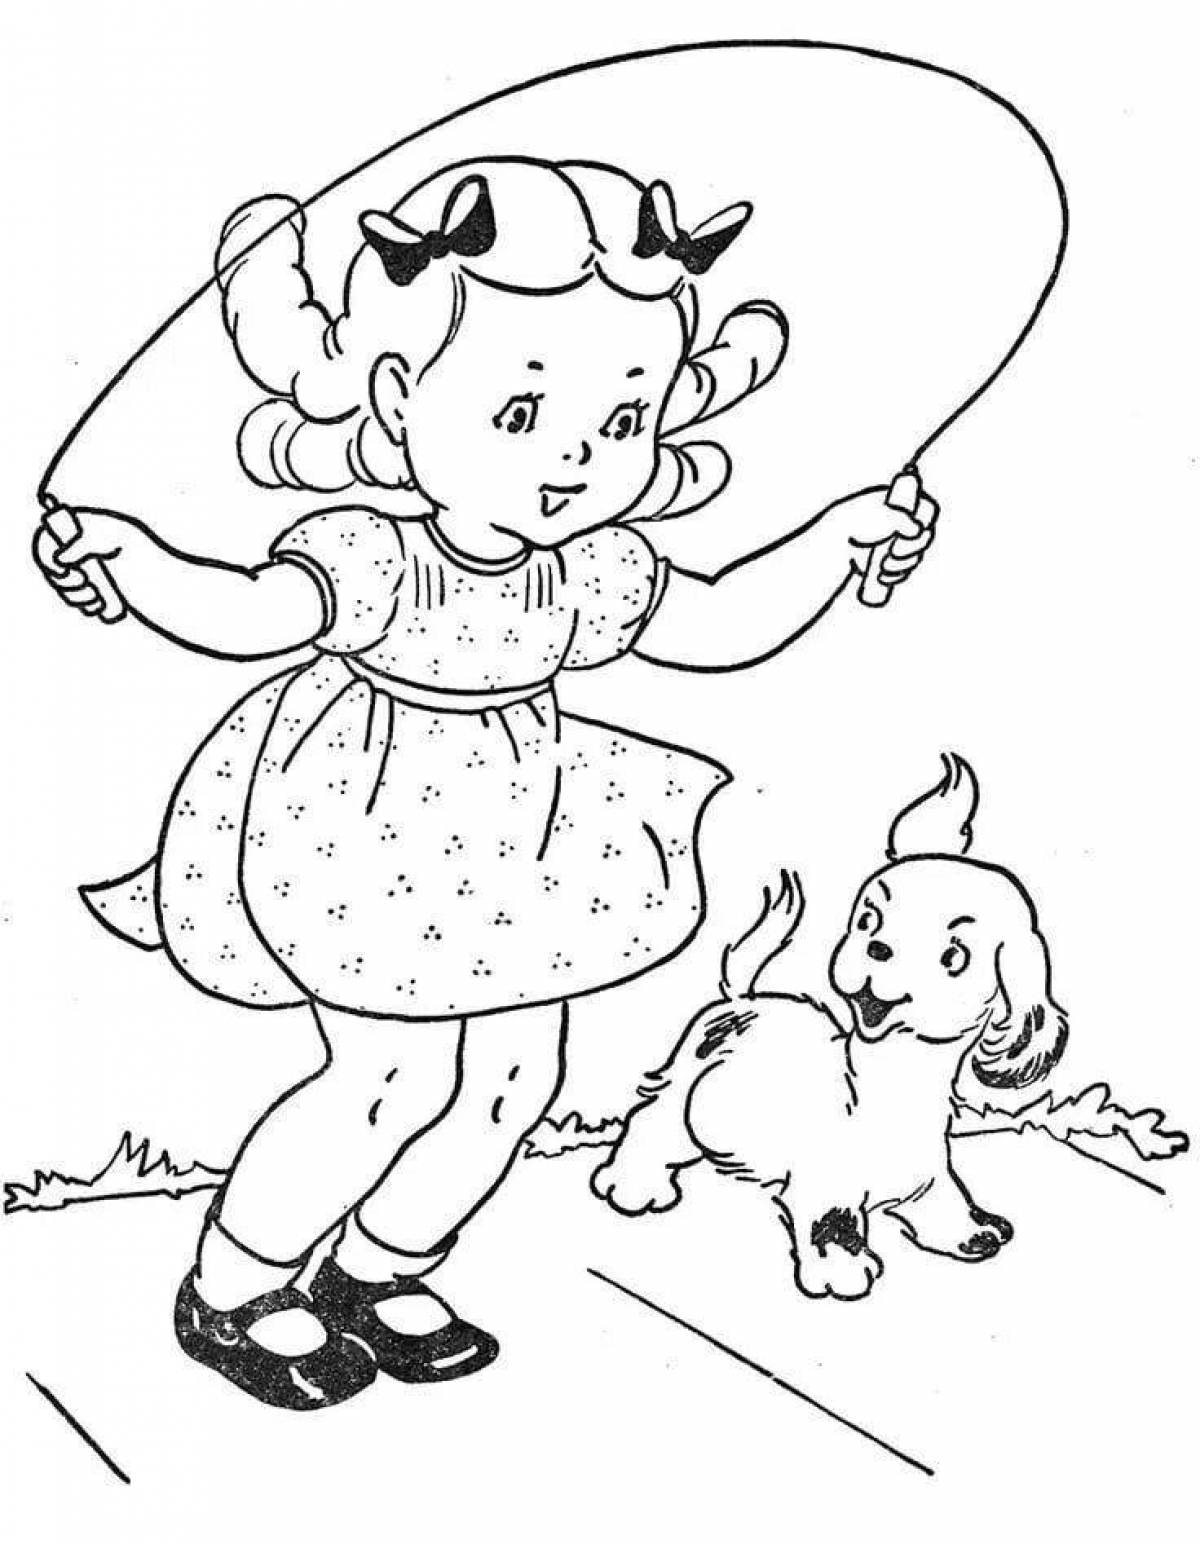 Adorable coloring book girl with a dog